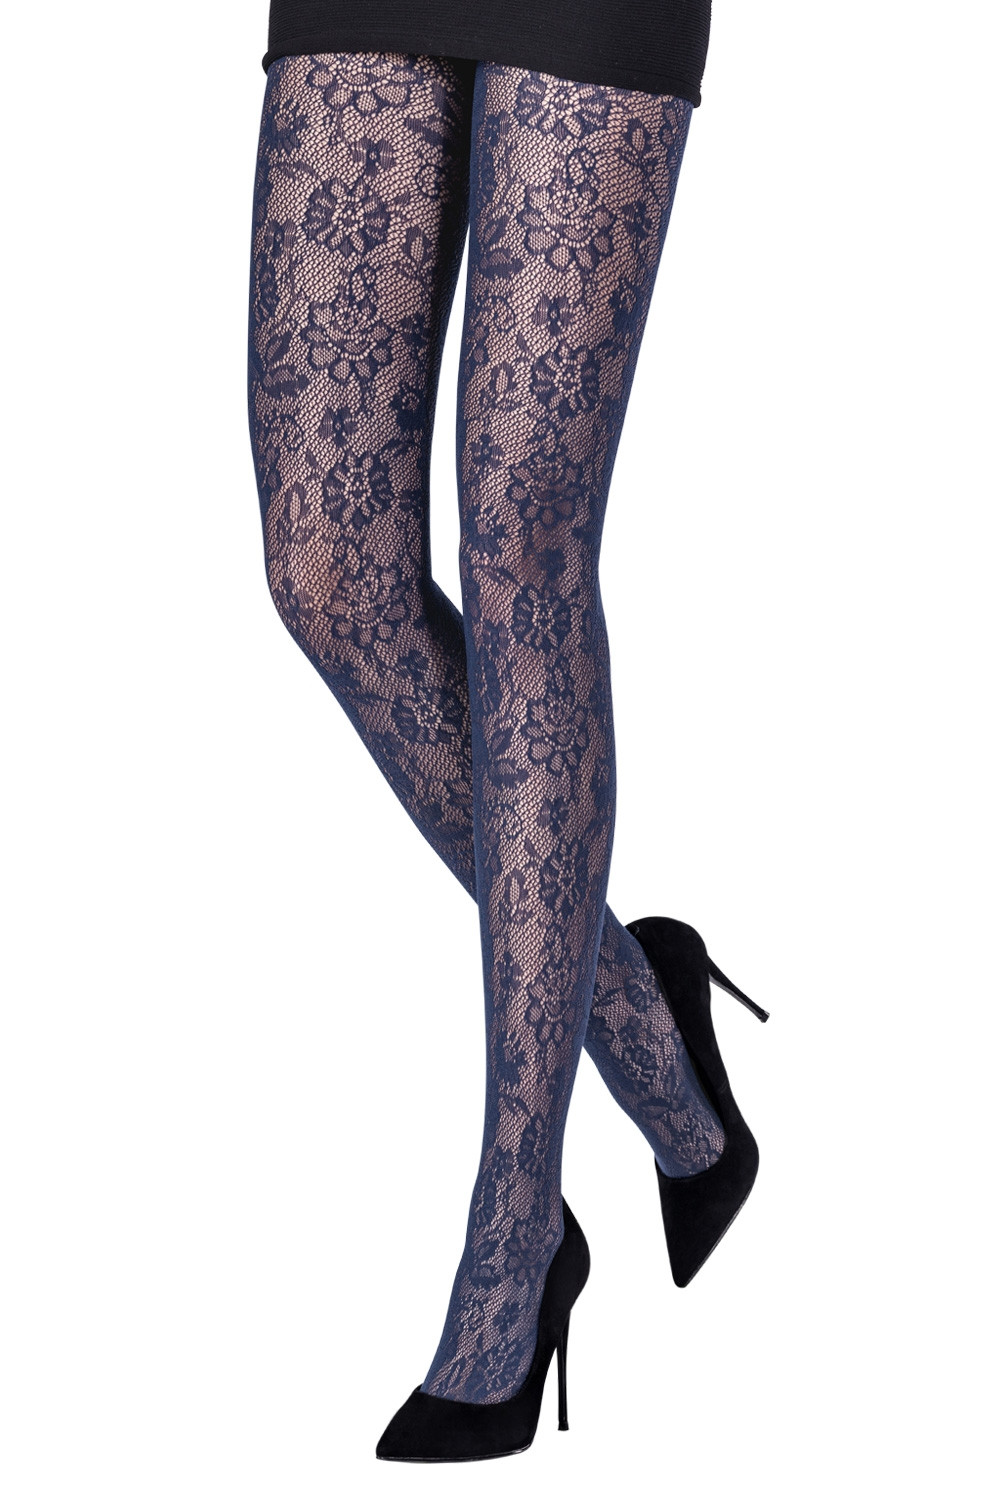 Small blue floral thigh high stay-up - Virivee Tights - Unique tights  designed and made in Europe